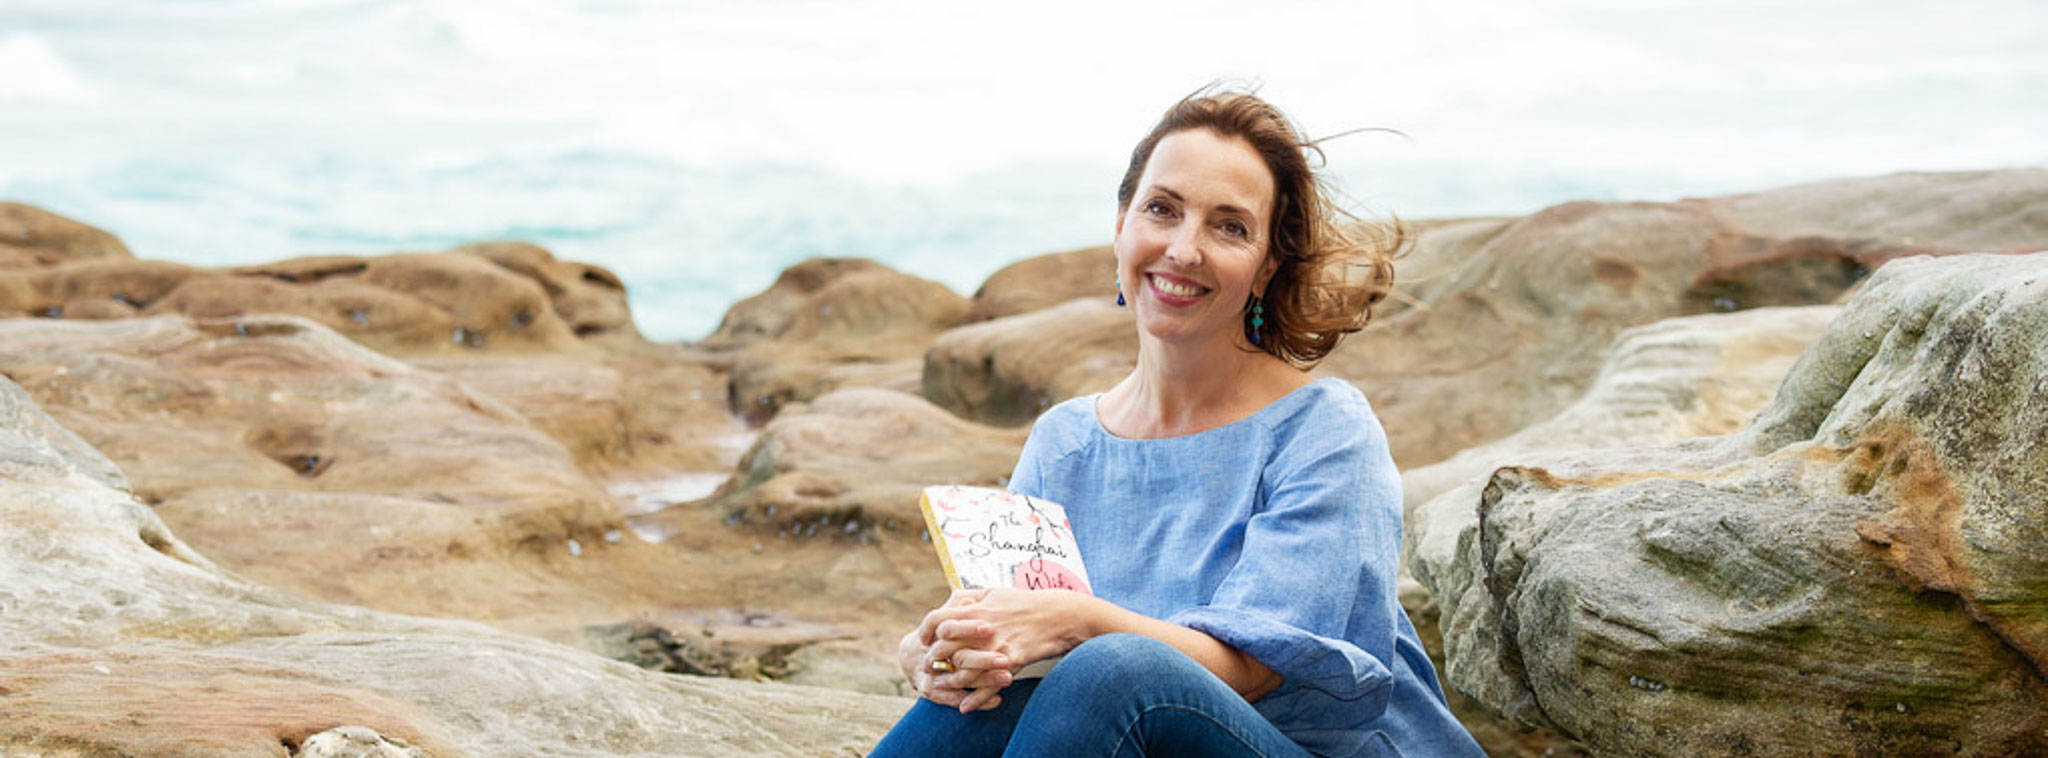 Australian author Emma Harcourt has written a new novel called Shanghai Wife, inspired by her Aussie grandparents who lived in 1920s Shanghai.